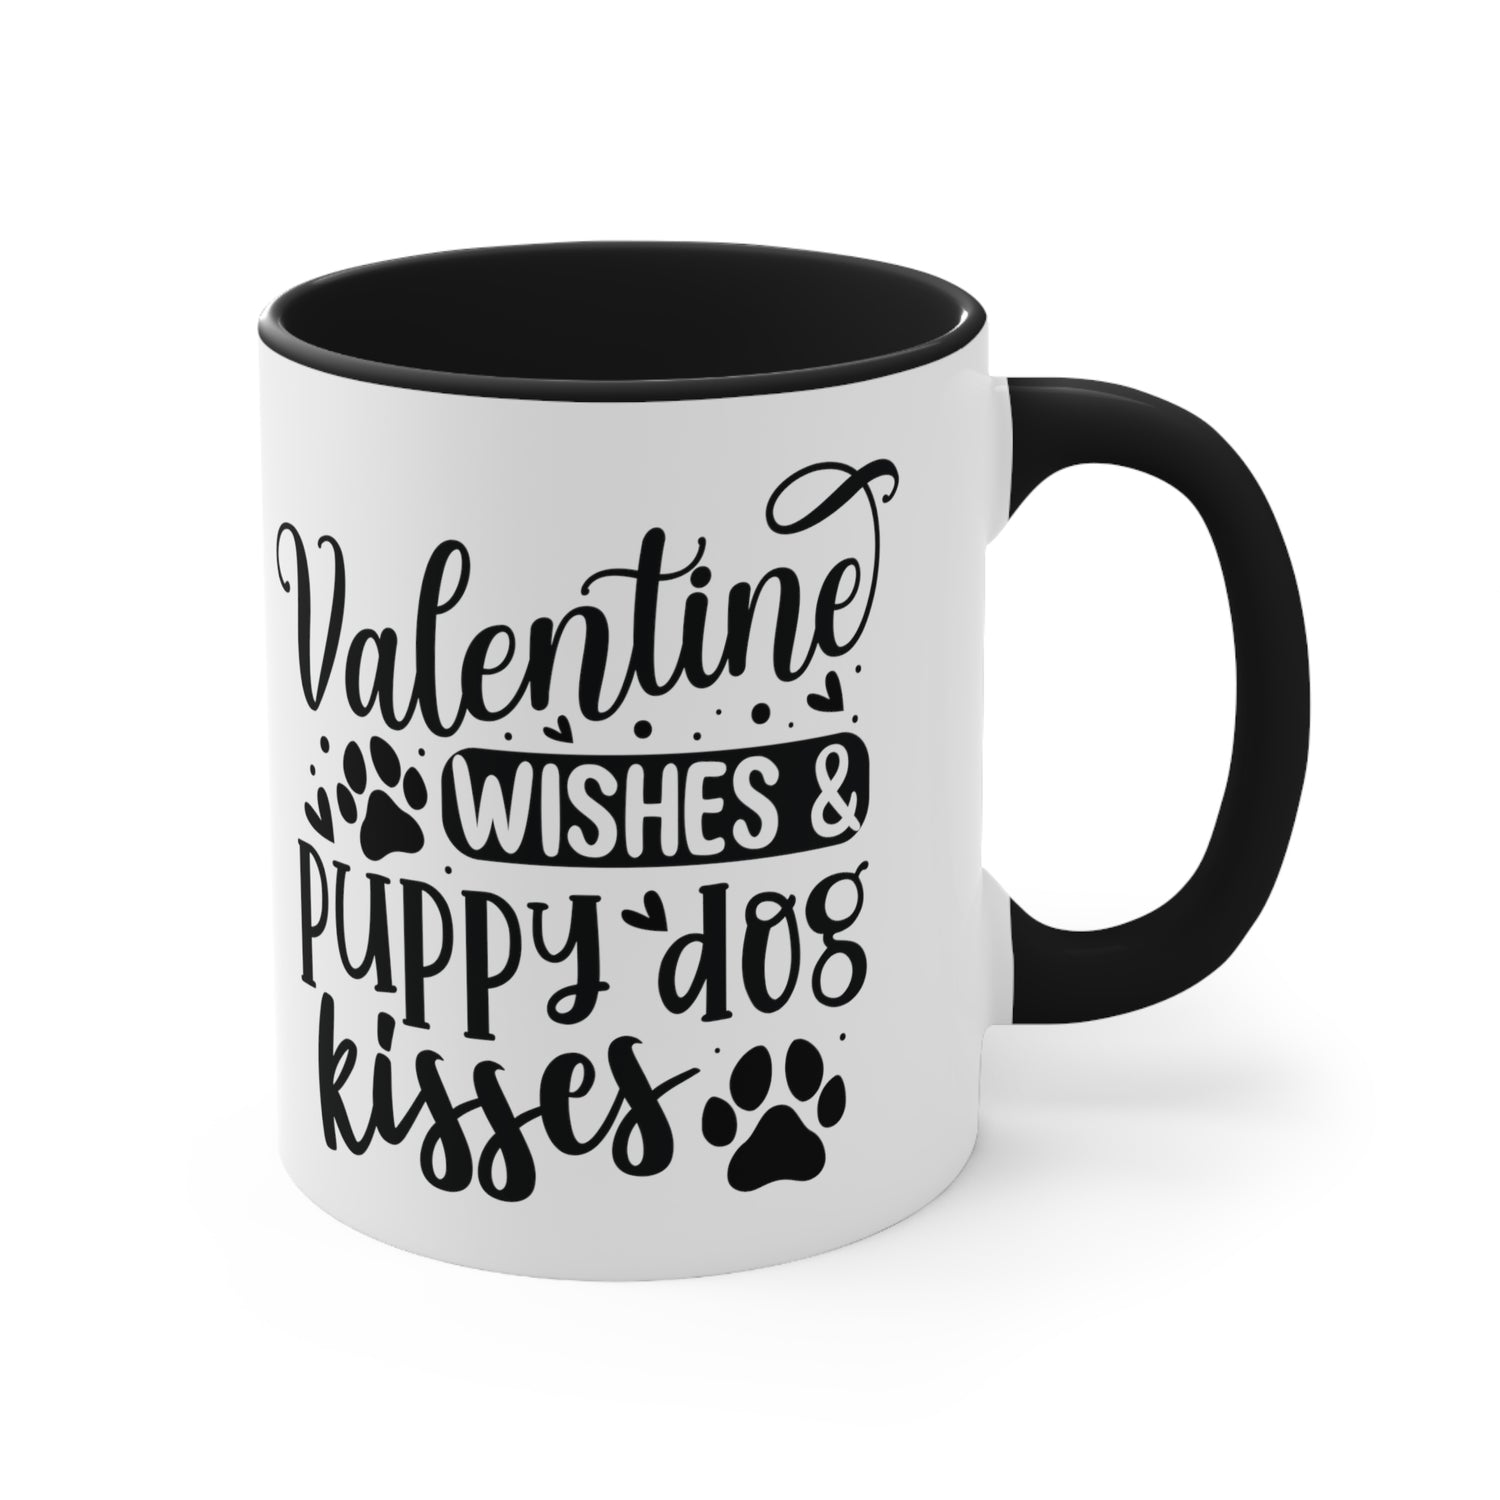 Pet Themed Gifts - All